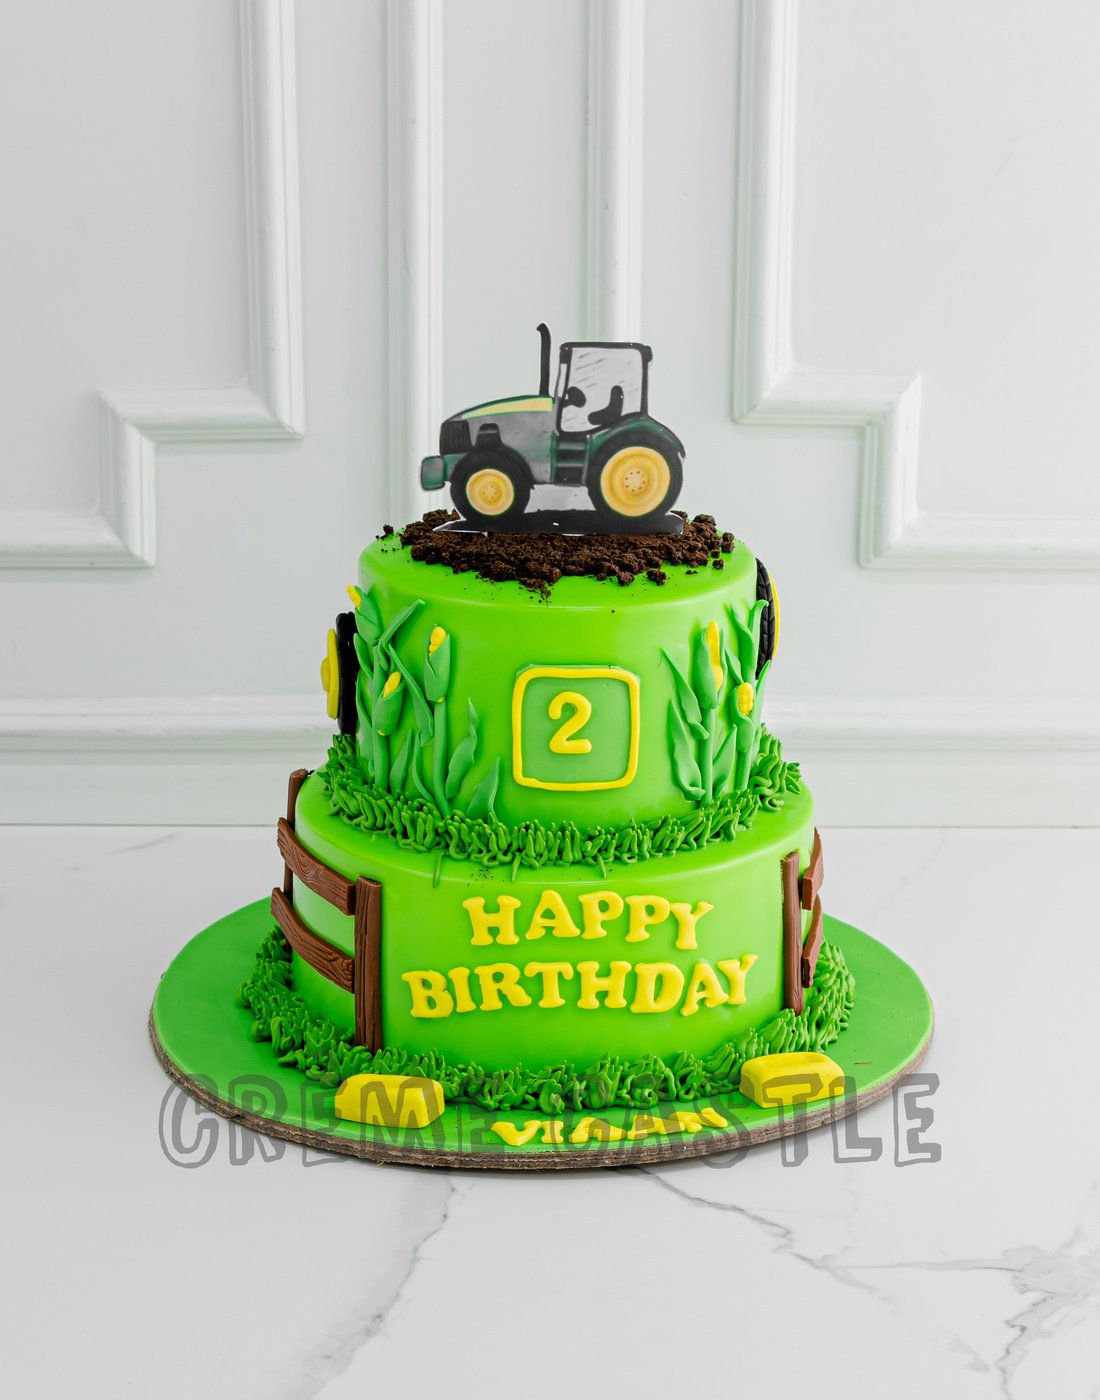 How to Make a Tractor Cake Topper